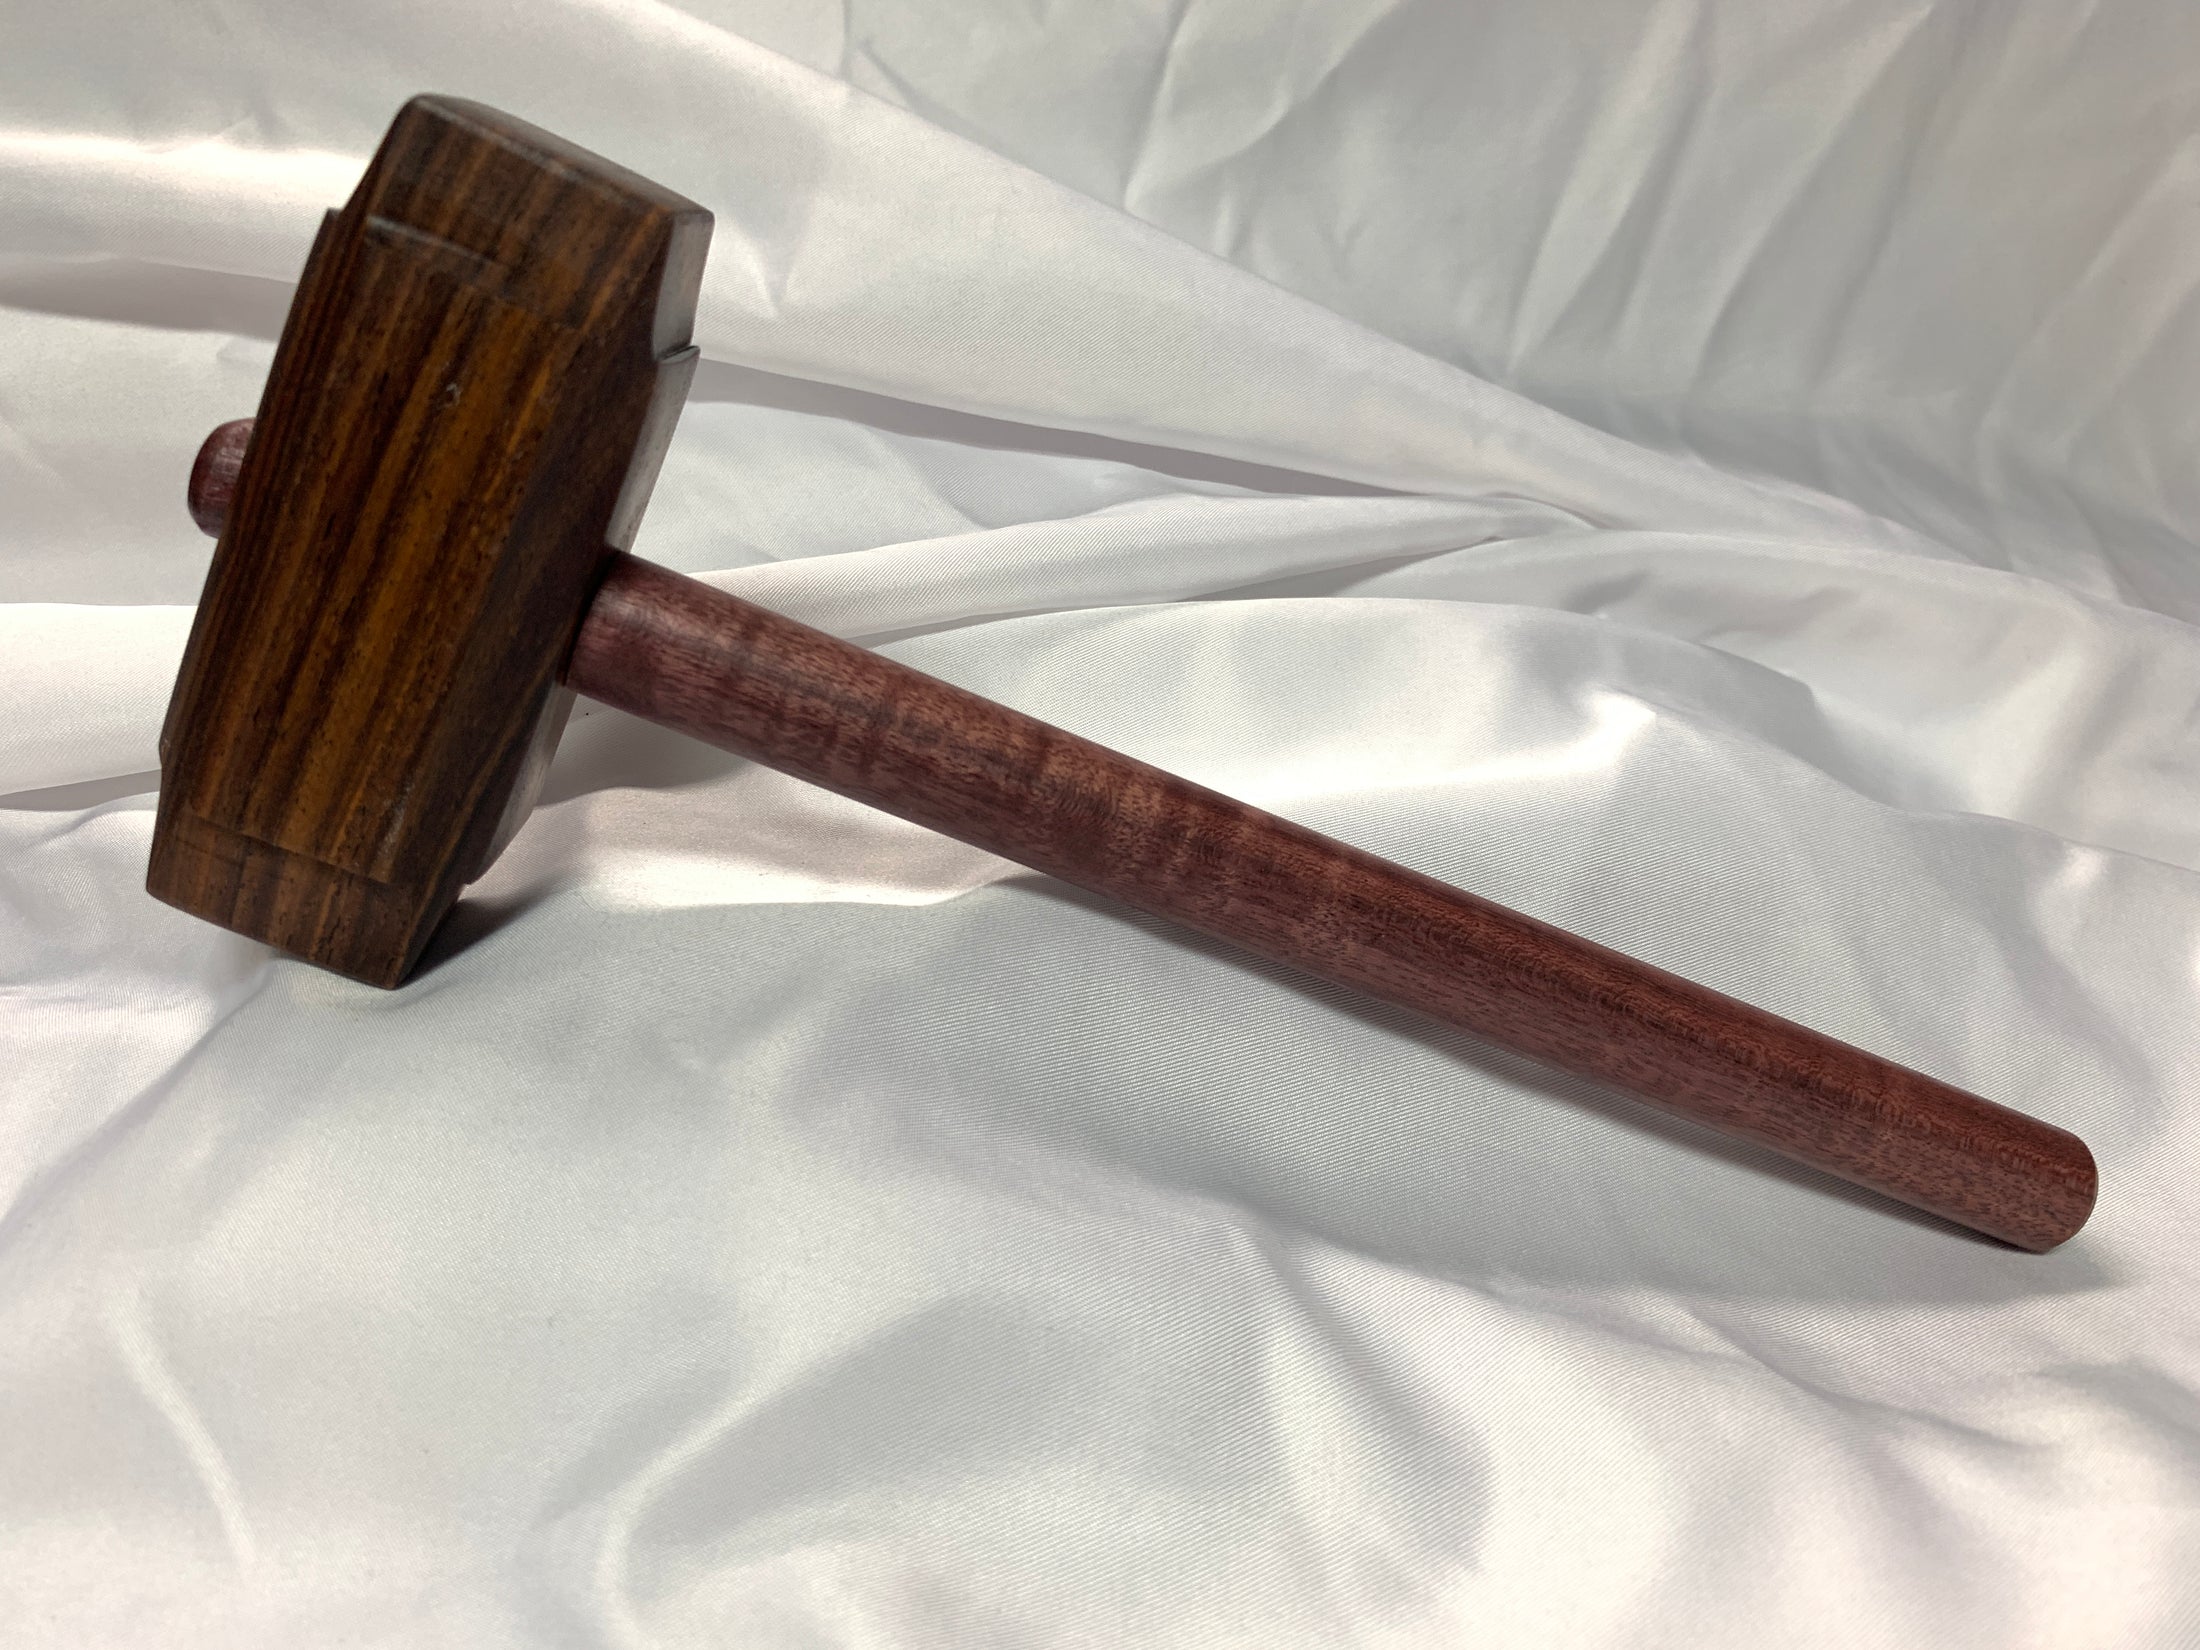 Thors Hammer Woodworking Mallet Cocobolo Head with Purpleheart Handle Kings Fine Woodworking